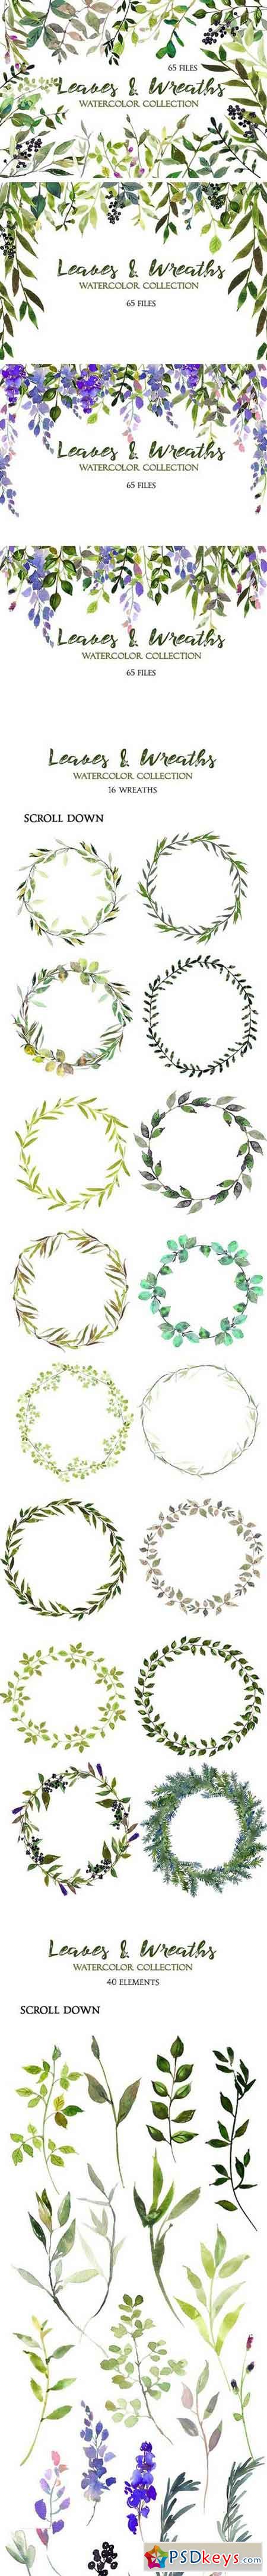 Leaves and Wreaths Watercolor Set 1090096